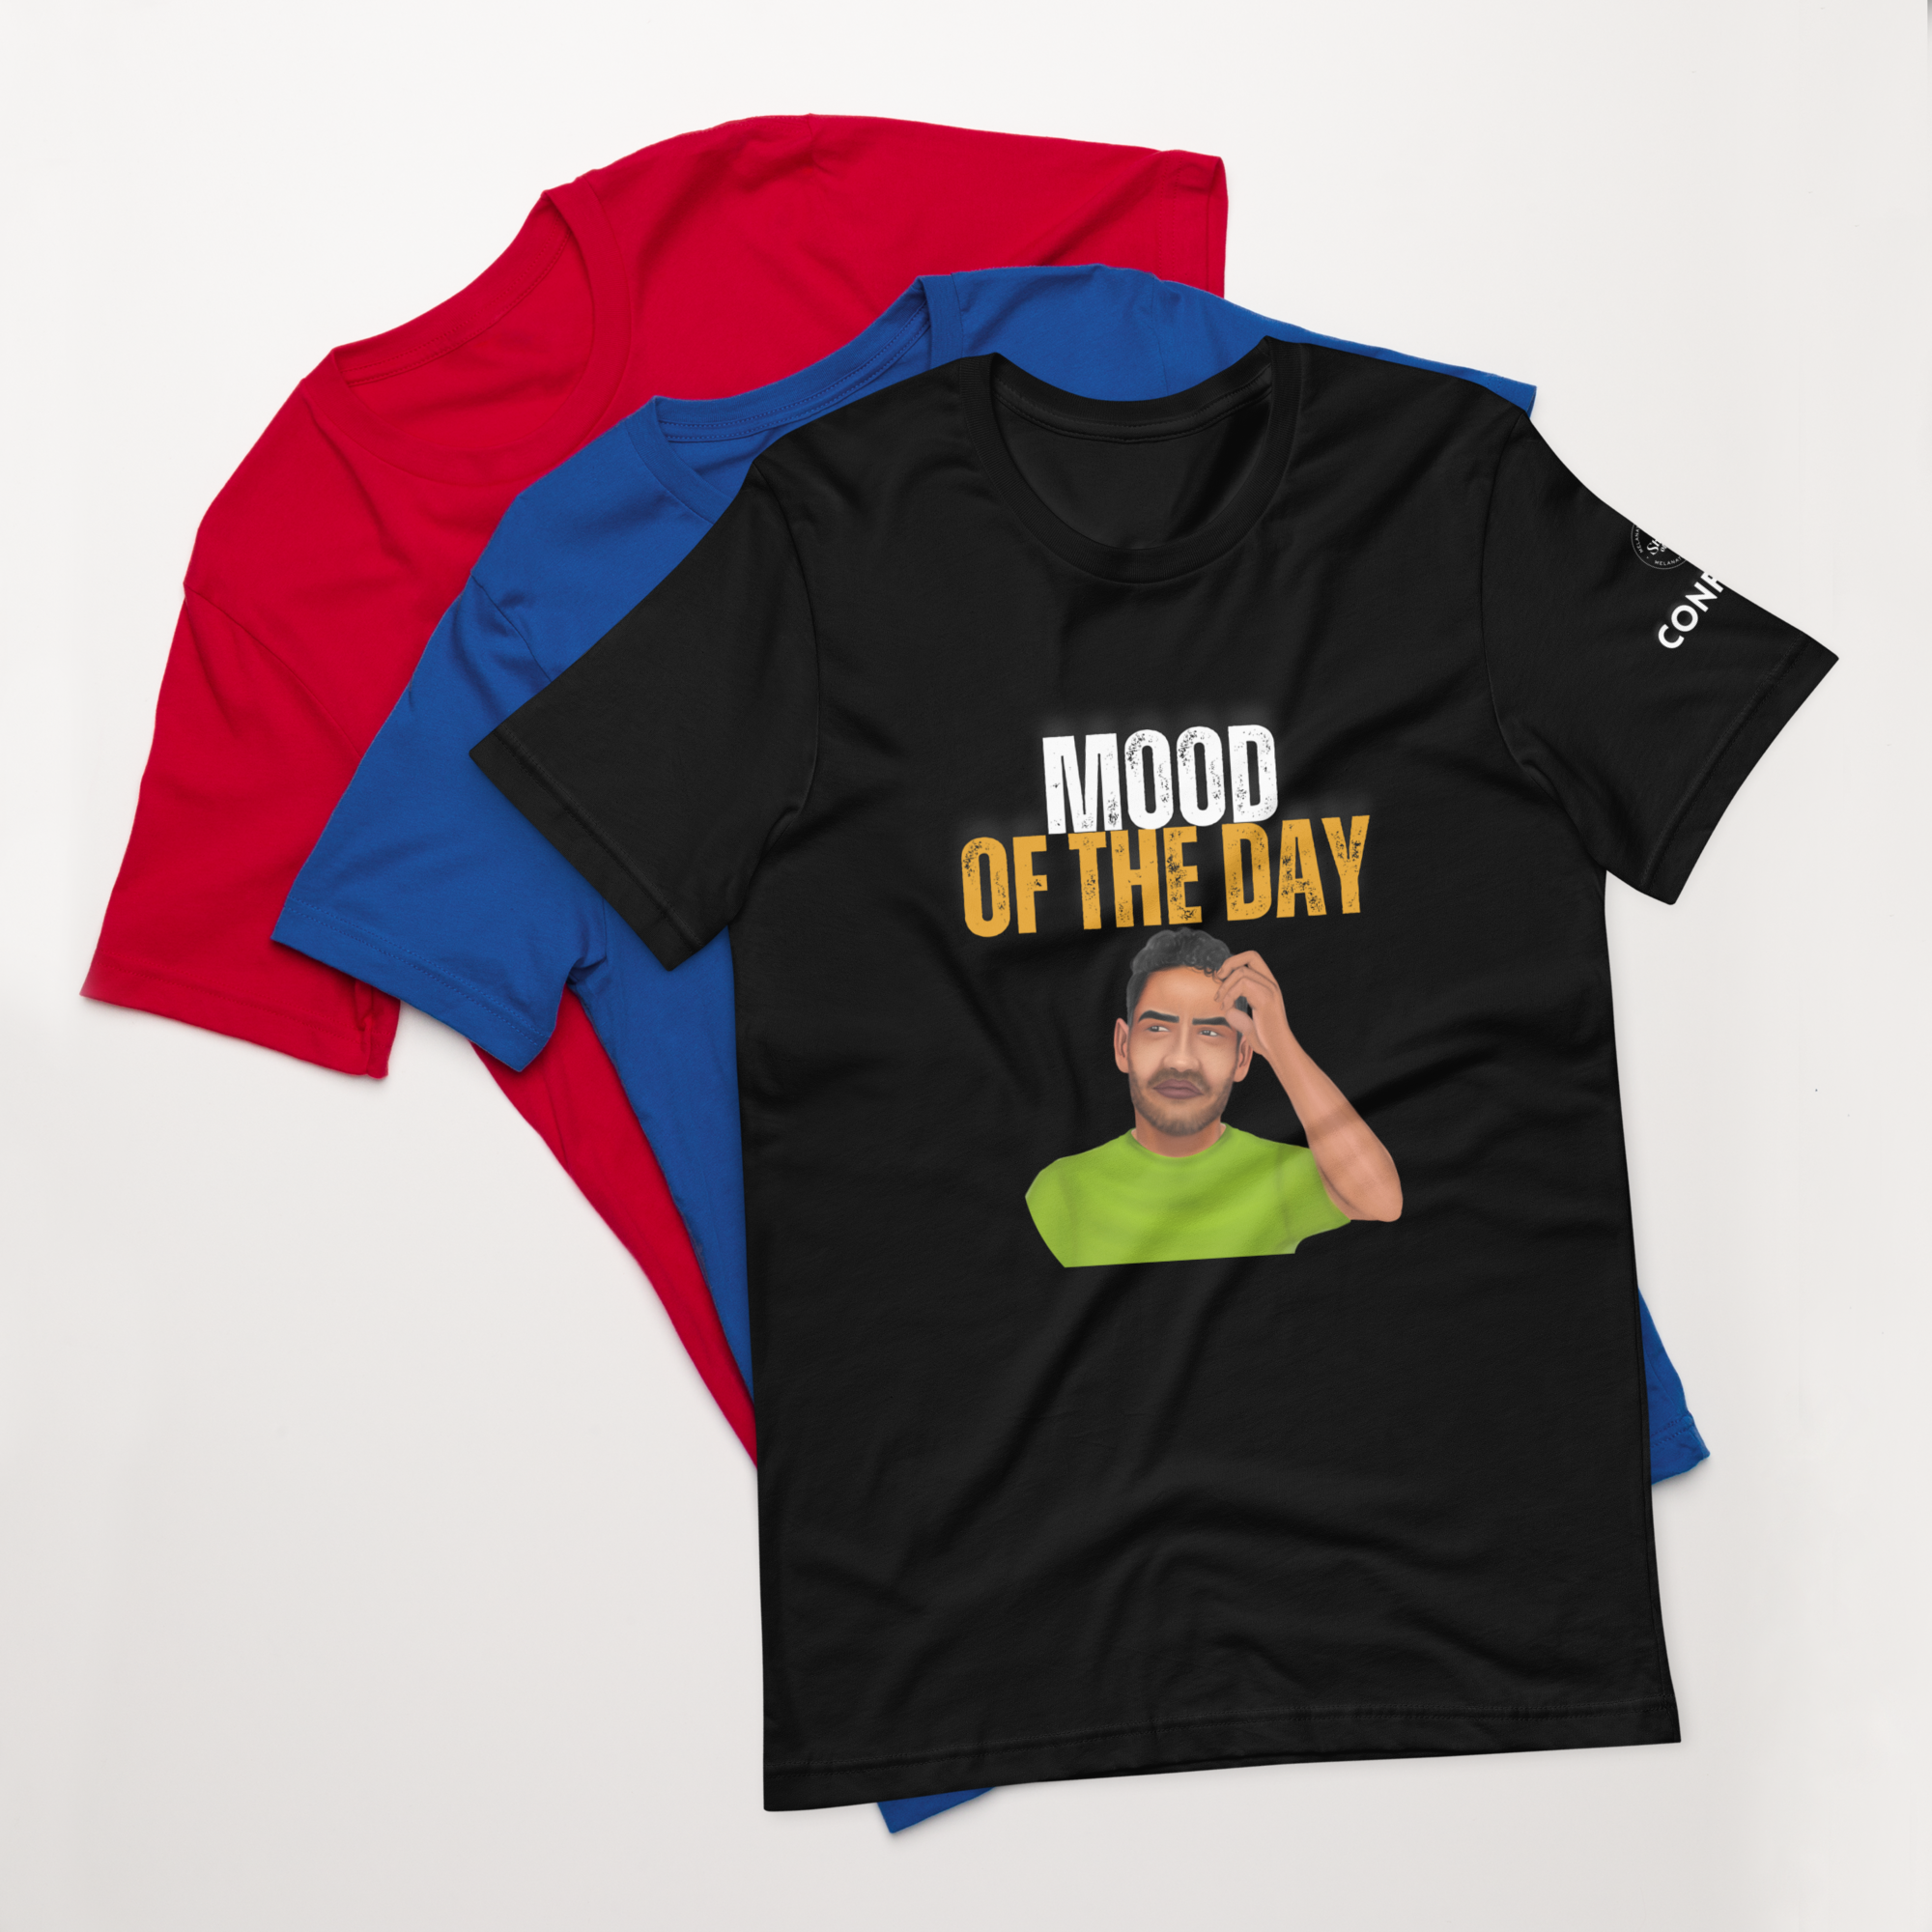 Mood of the Day T-Shirt - Confused